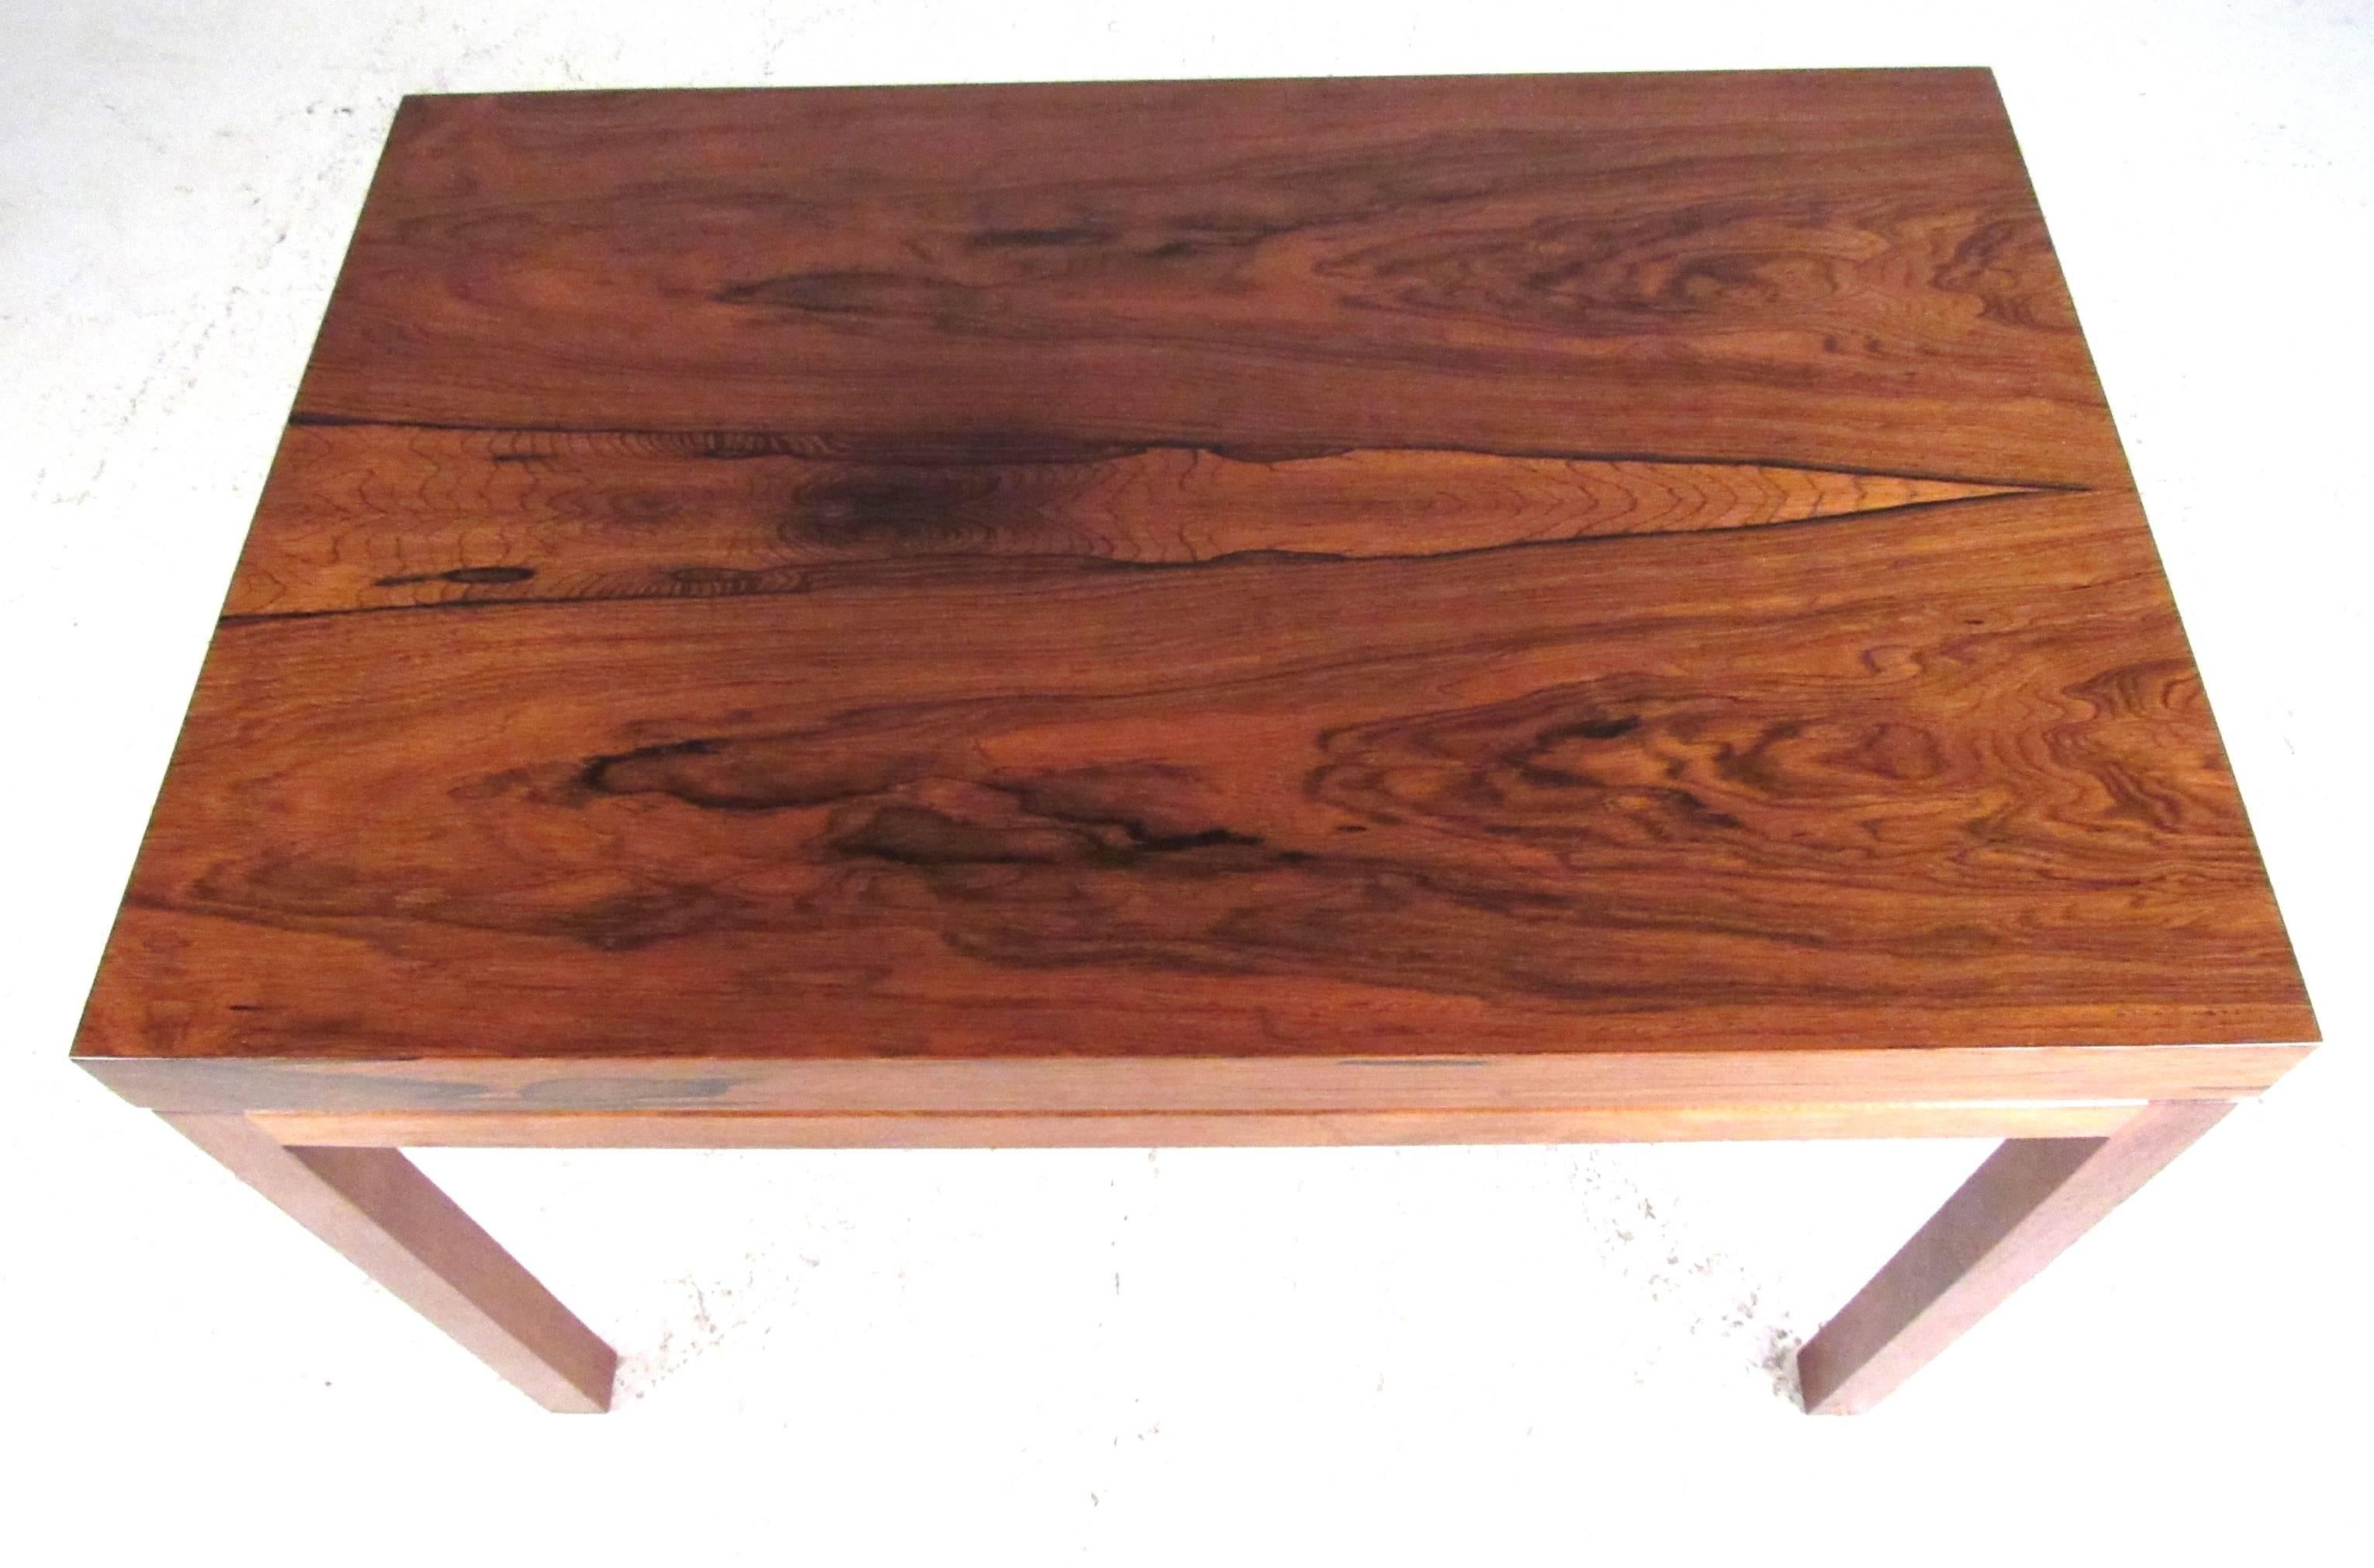 An elegant rectangular rosewood coffee table designed by Milo Baughman for Thayer Coggin, circa 1960s. Very nice vintage condition with original label.